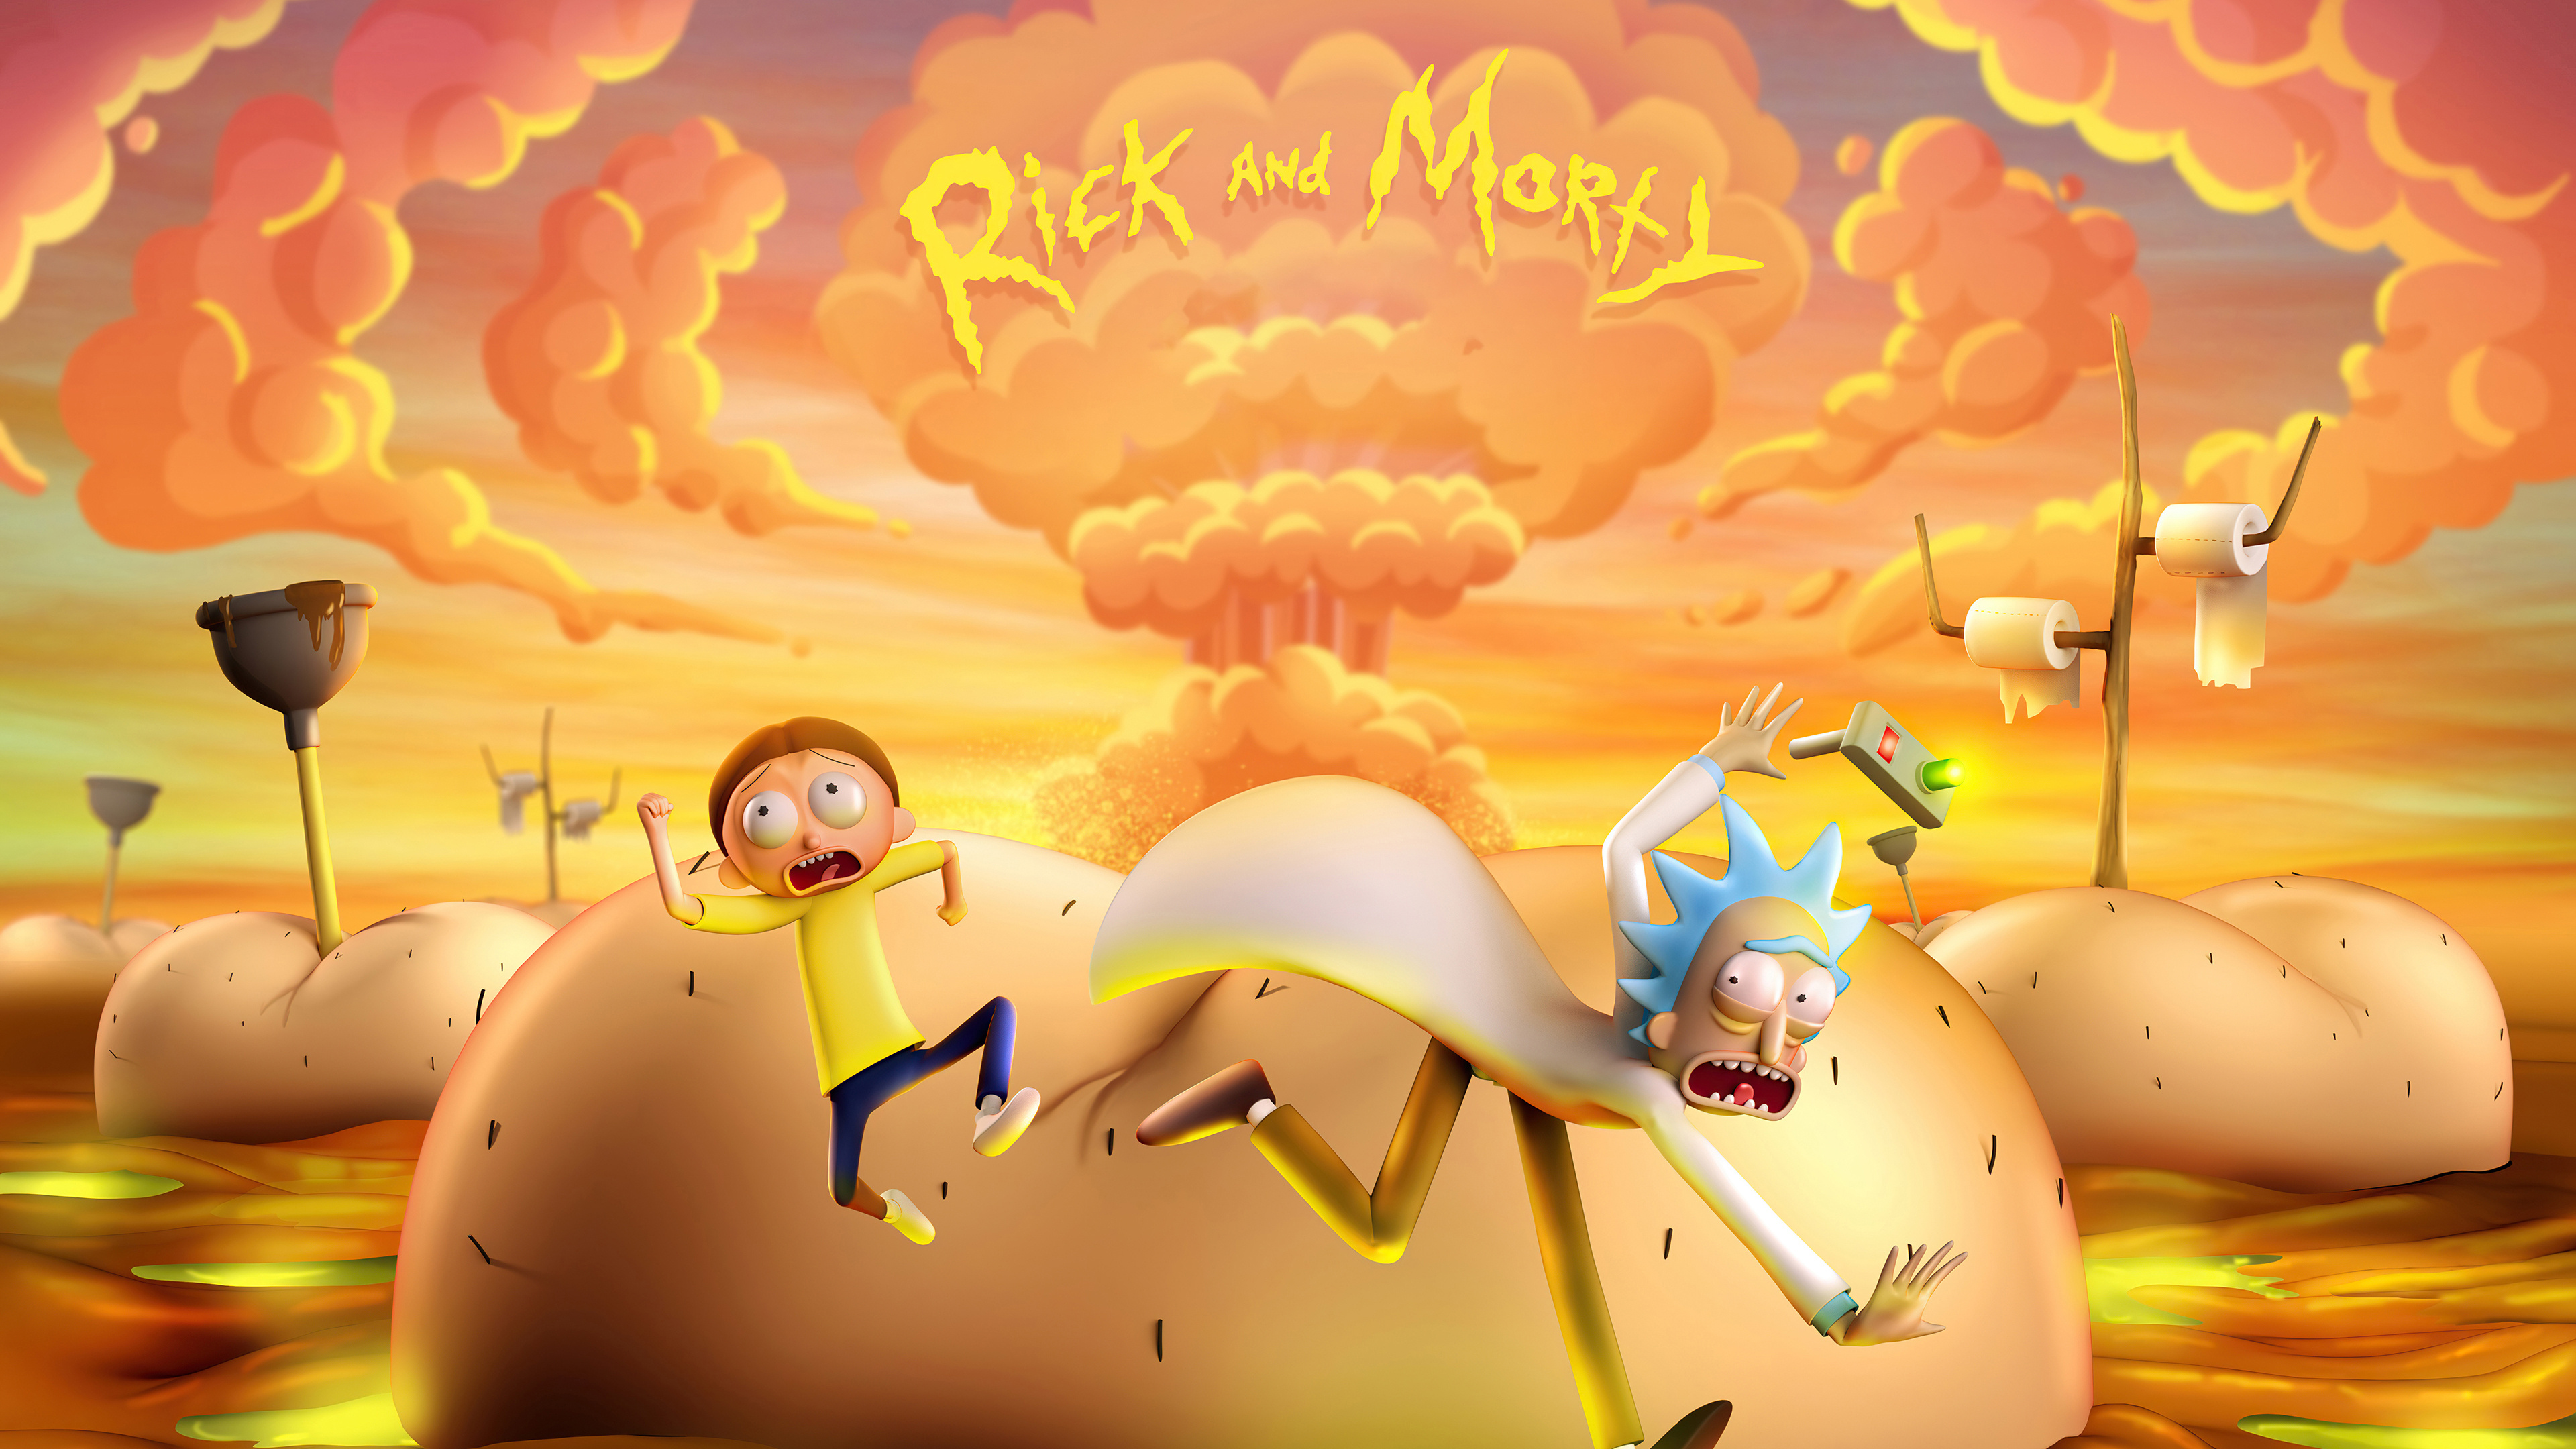 Rick and Morty in 3D Wallpaper 4k Ultra HD ID:8453